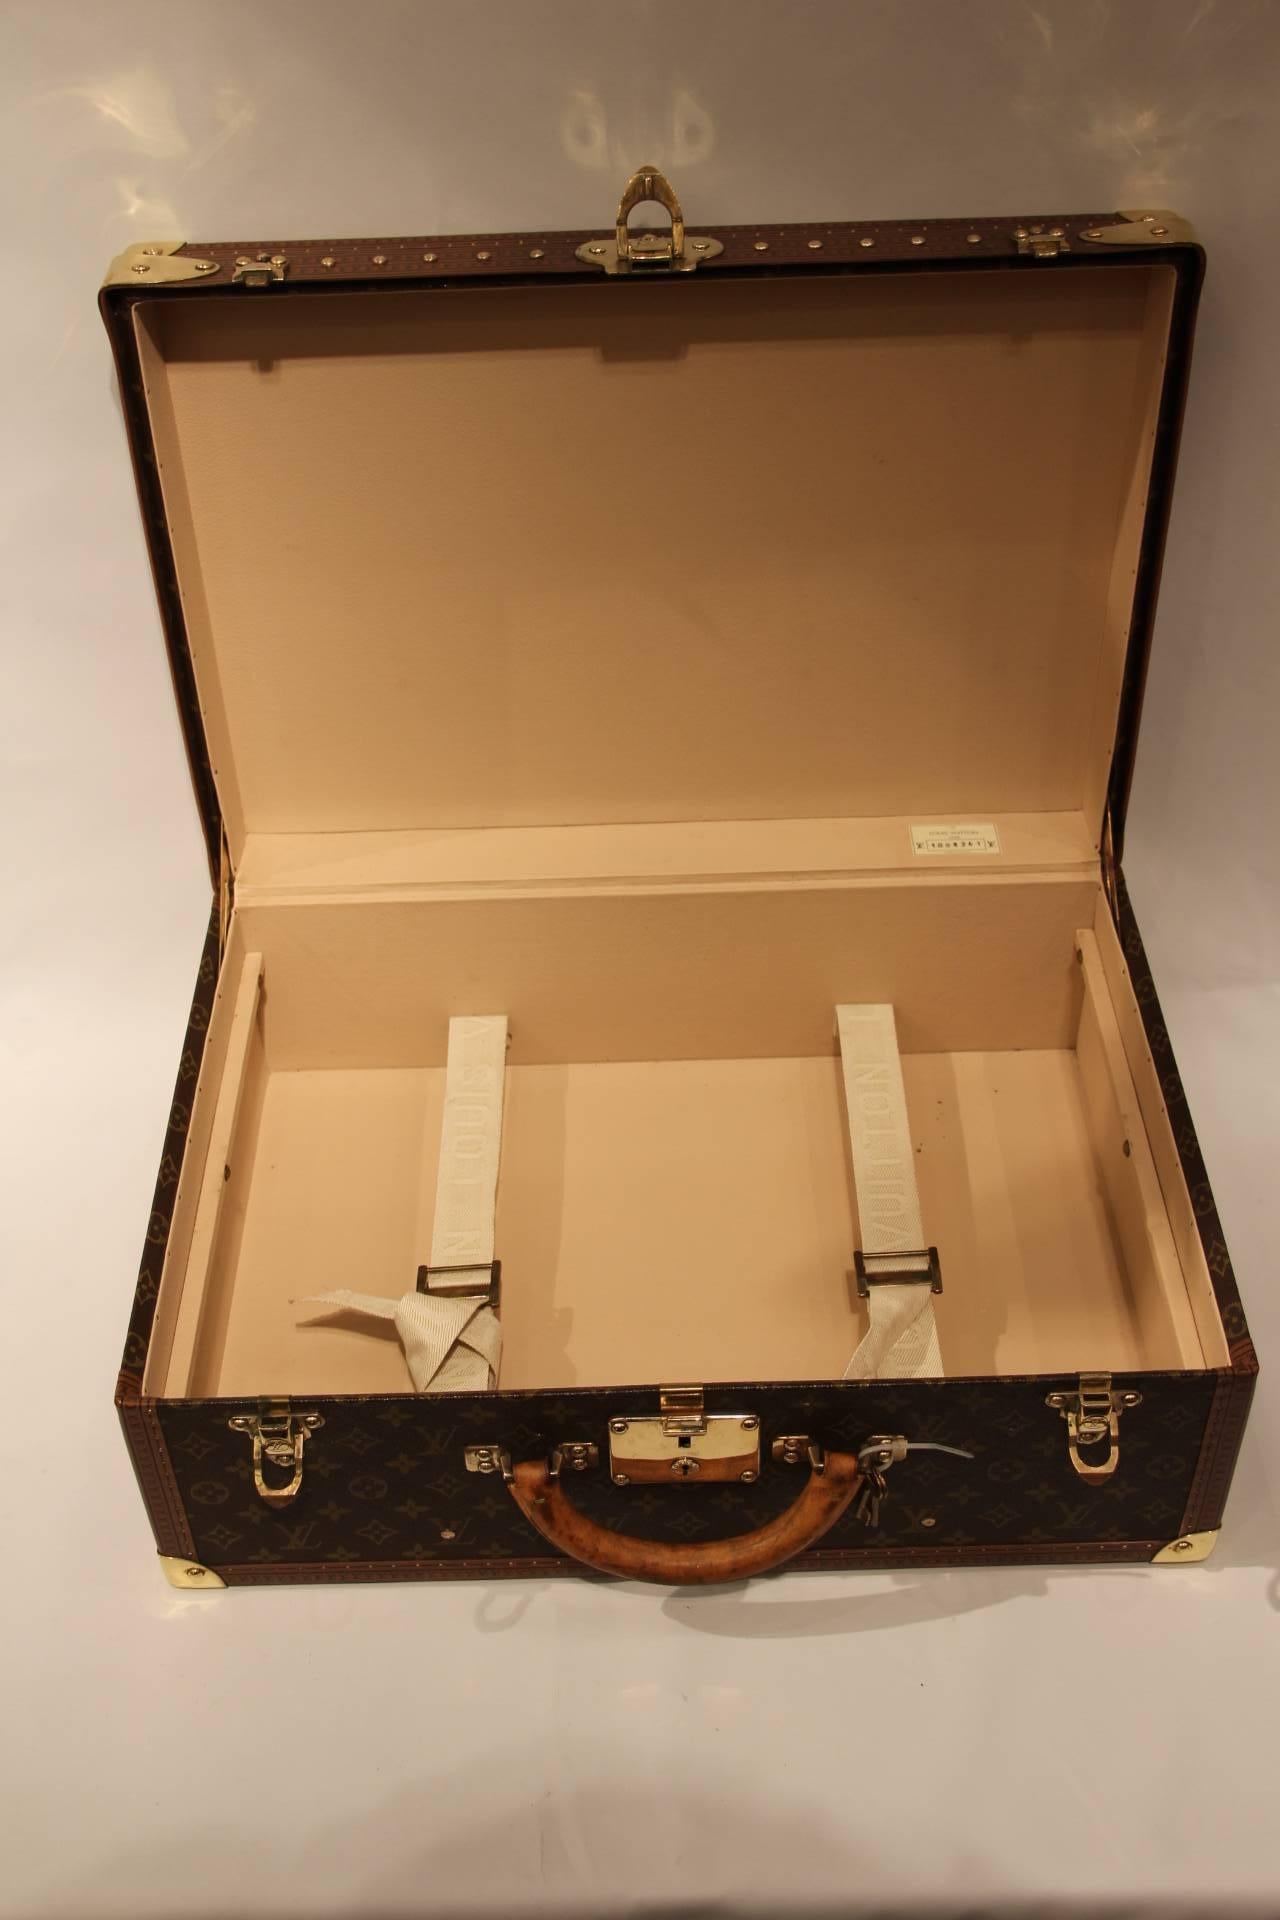 Magnificent Louis Vuitton monogramm suitcase.All brass fittings.
Interior in perfect condition except a stain on the removable tray(as shown on photos). 
1 key.
